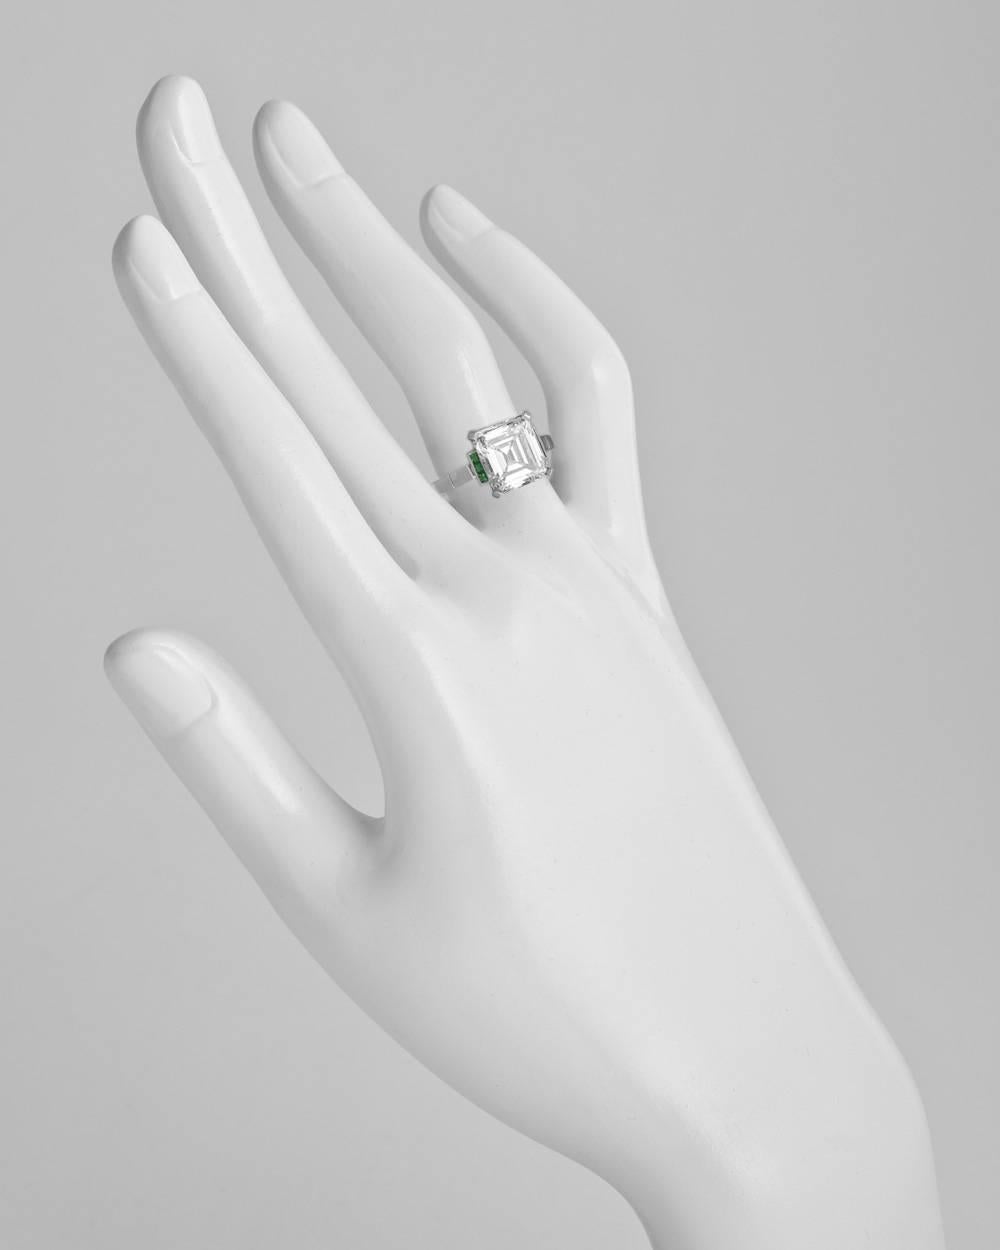 Diamond engagement ring, showcasing a colorless emerald-cut diamond weighing 3.43 carats (F-color/SI1-clarity), flanked by three step-cut emerald accents at the top of either shoulder, mounted in platinum. Six emeralds weighing 0.08 total carats.